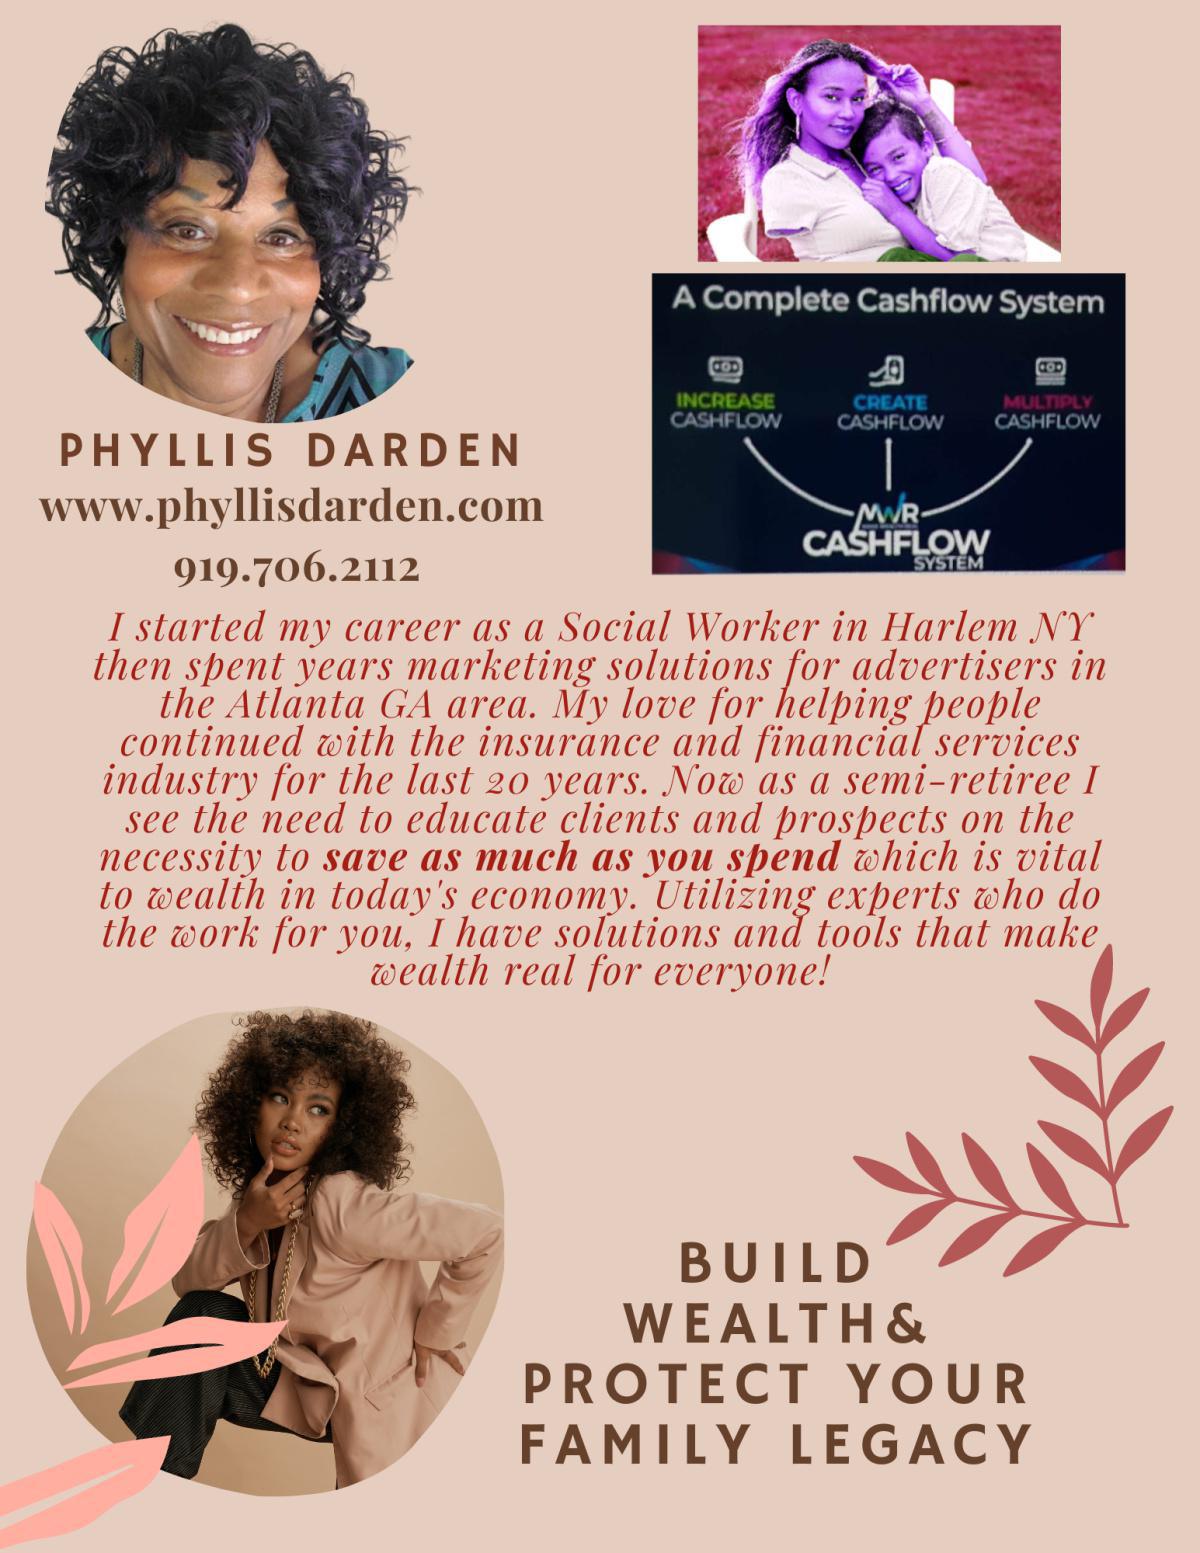 7 Funerals for $75 a month - Connect with Phyllis Darden 919.706.2112